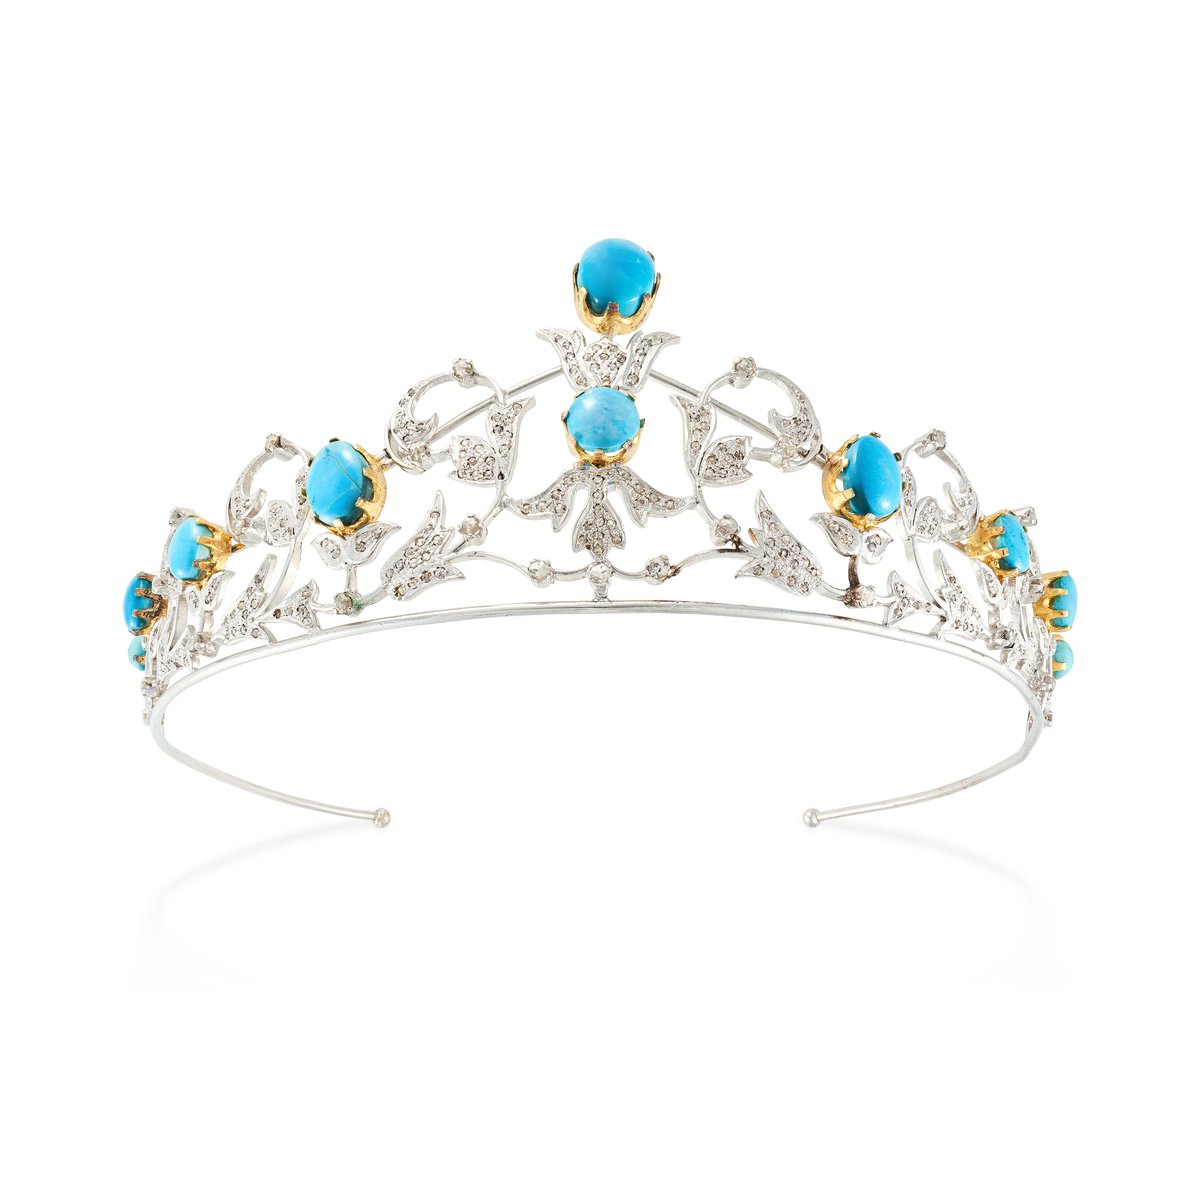 Tiara with cabochon turquoises and rose cut diamonds.
Will be auctioned at Elmwood's on 22 May 2024.